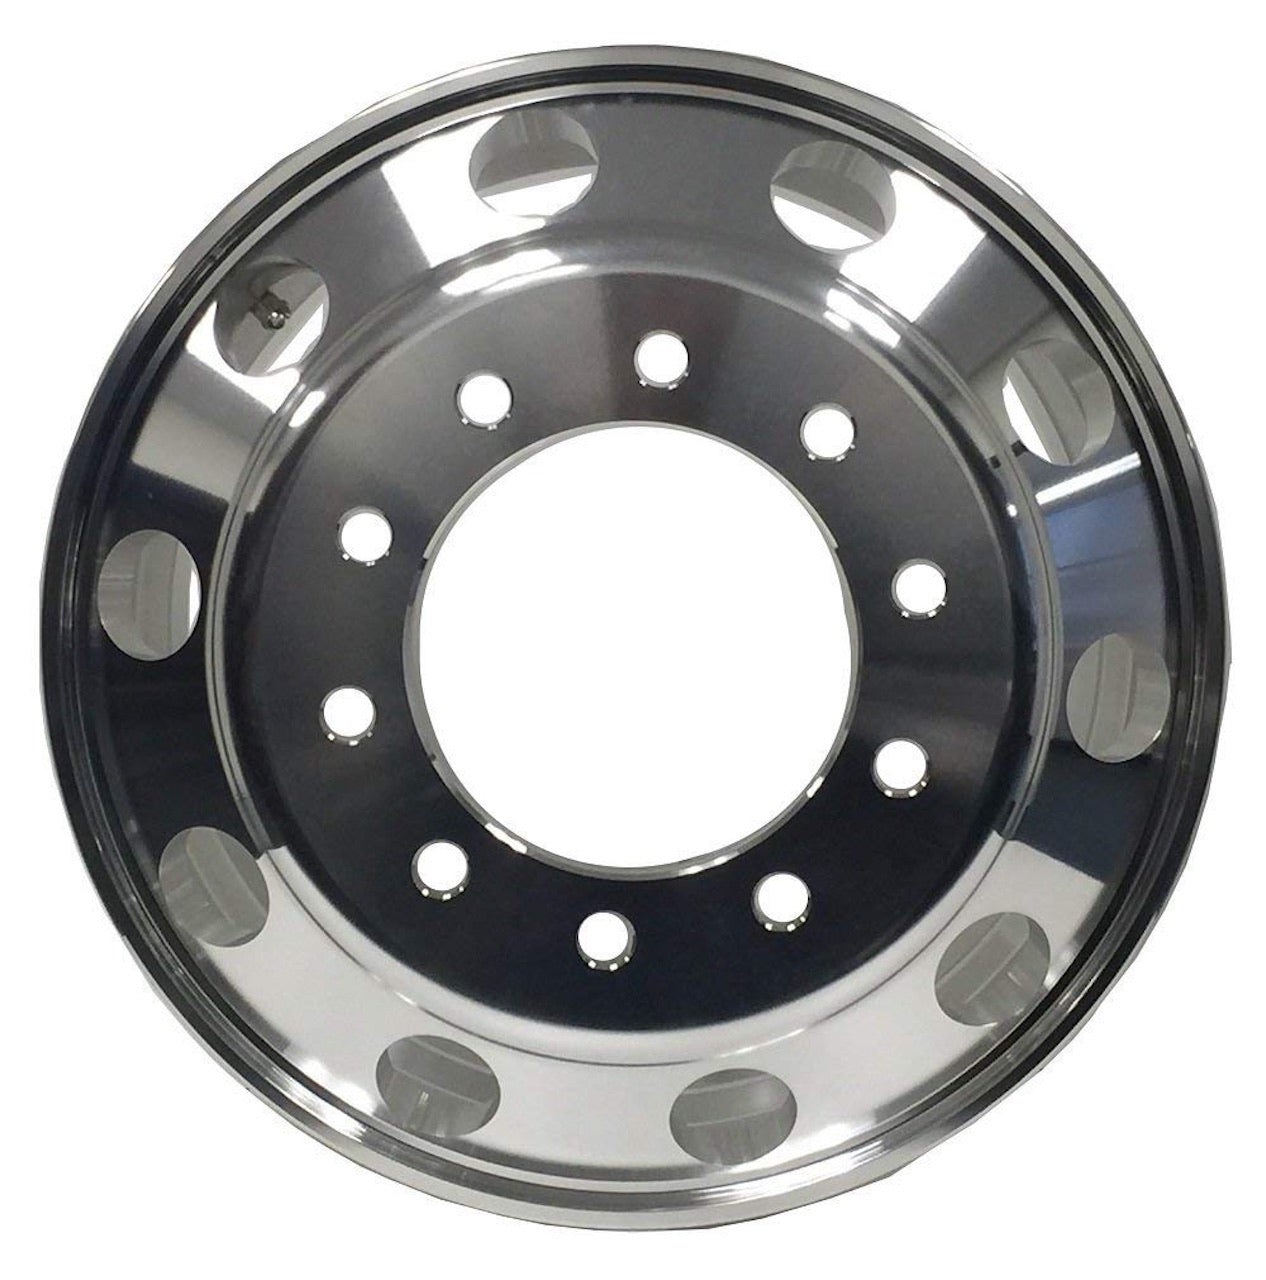 22.5 x 8.25 Forged Aluminum Truck Wheels Machined Bright FOB WHOLESALE PRICE $119/pc 600pcs